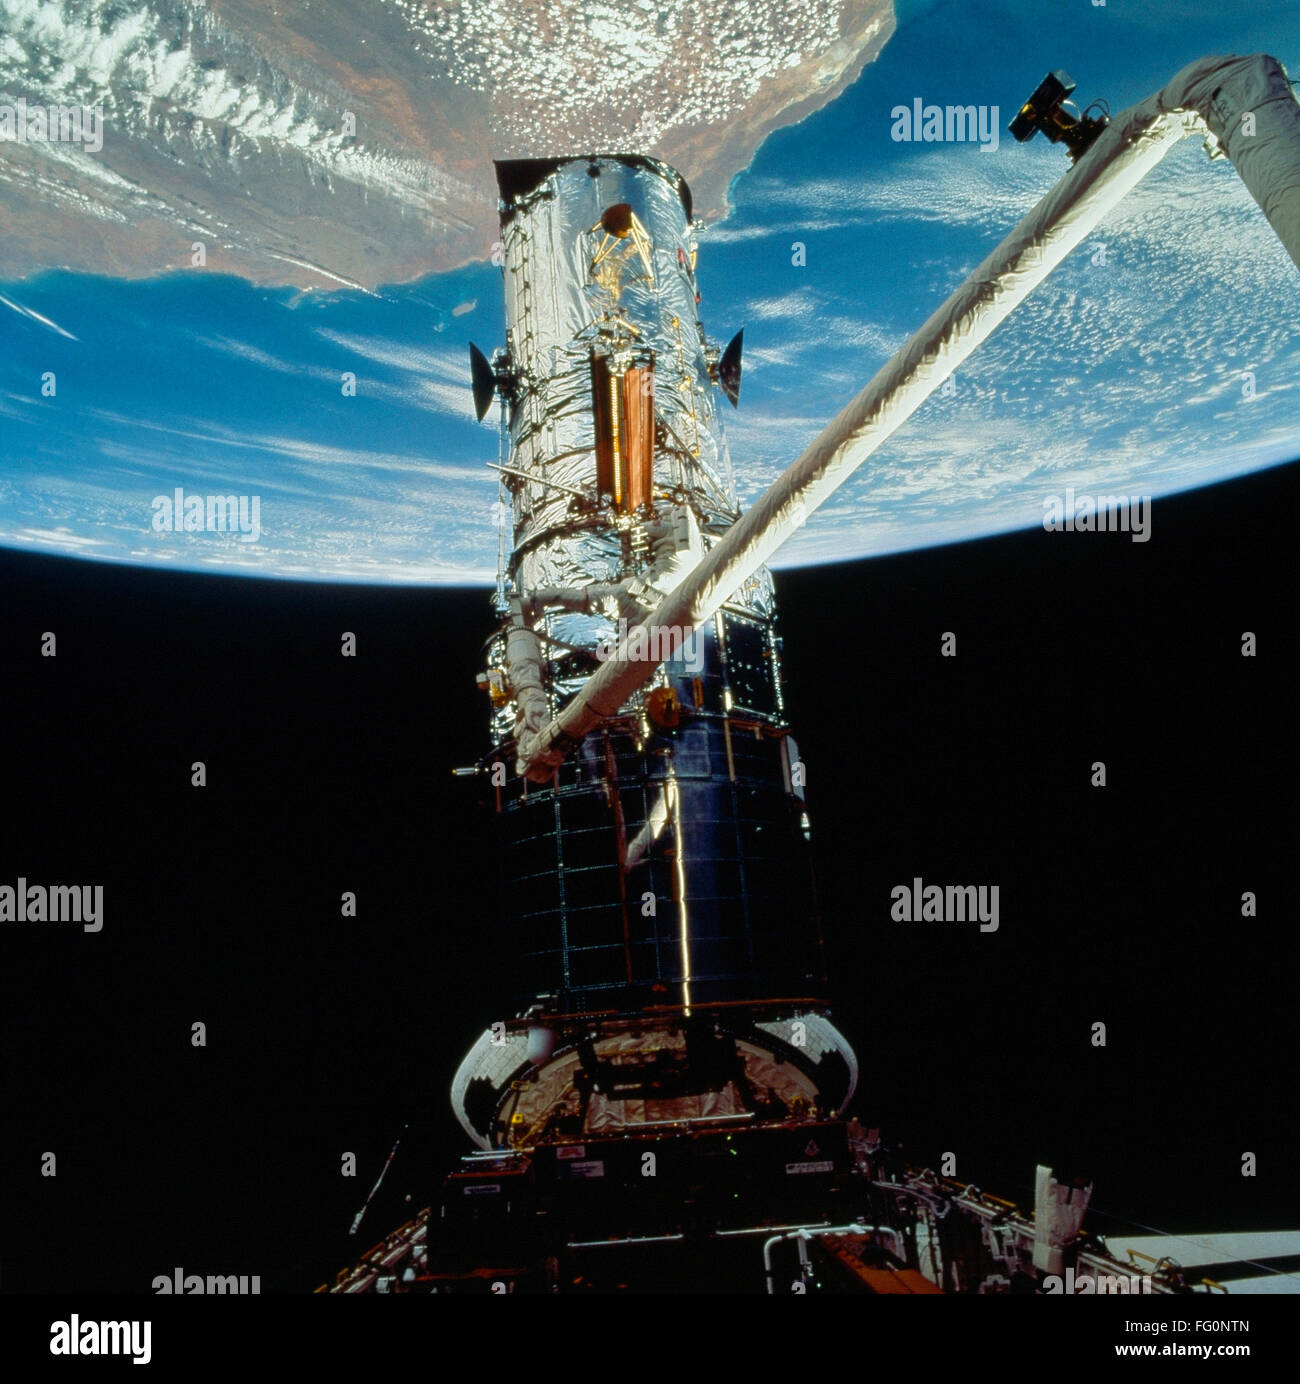 Astronauts work on Hubble in Shuttle Endeavour's payload bay STS-61 Photo Print 